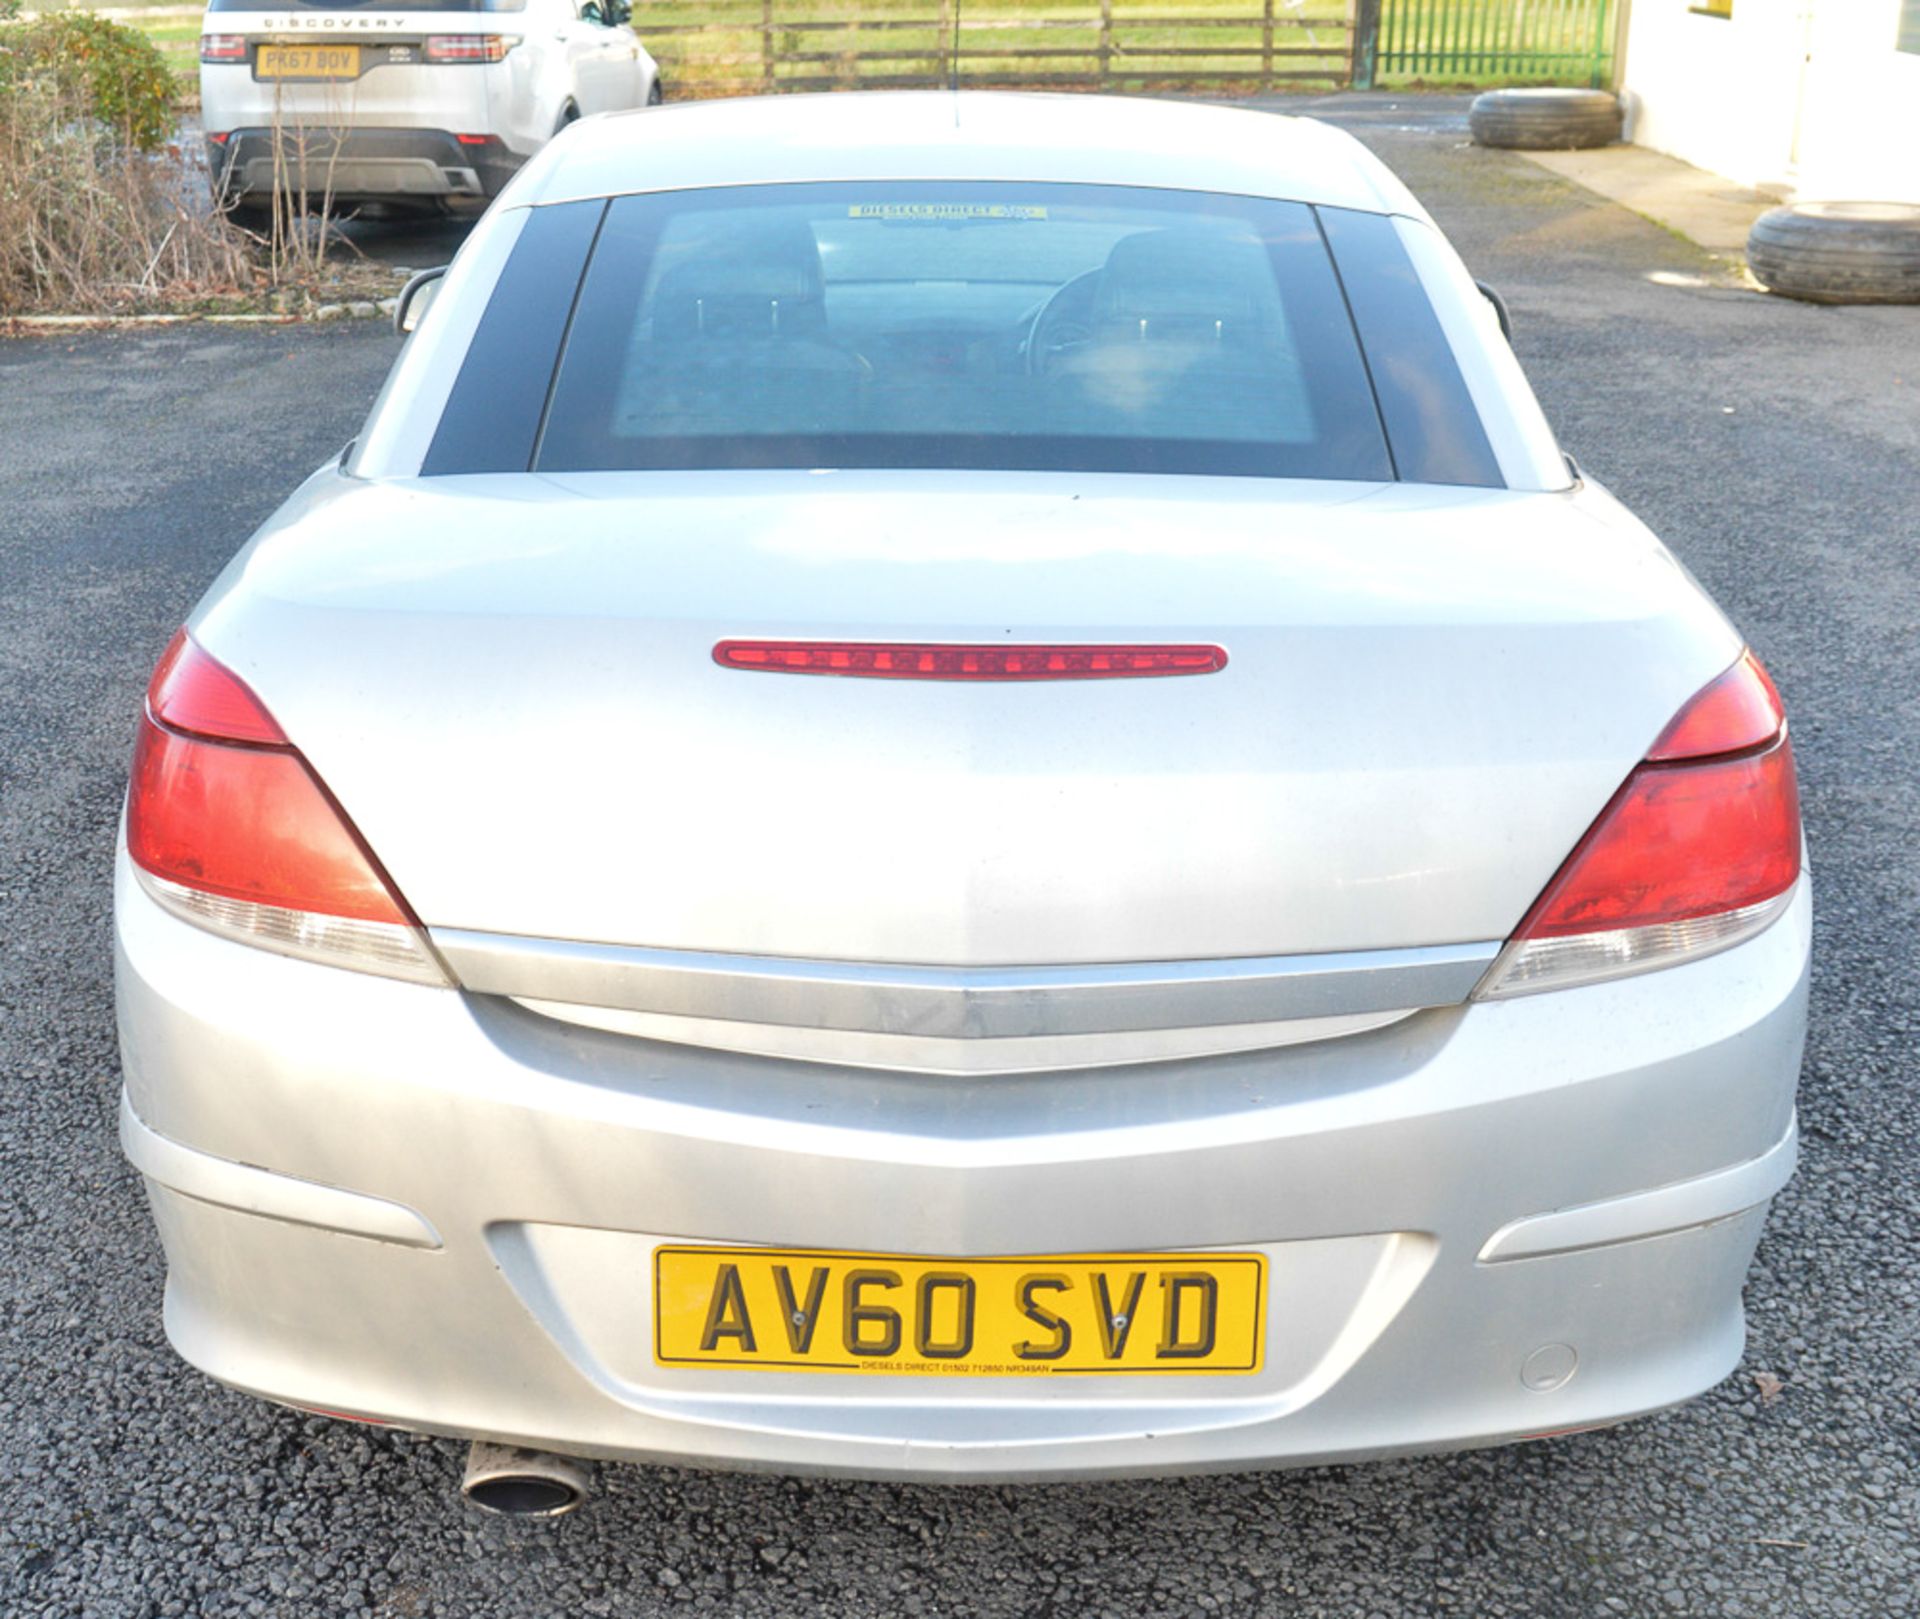 Vauxhall Astra CDTi Twintop Design diesel convertible car Registration Number: AV60 SVD Date of - Image 6 of 13